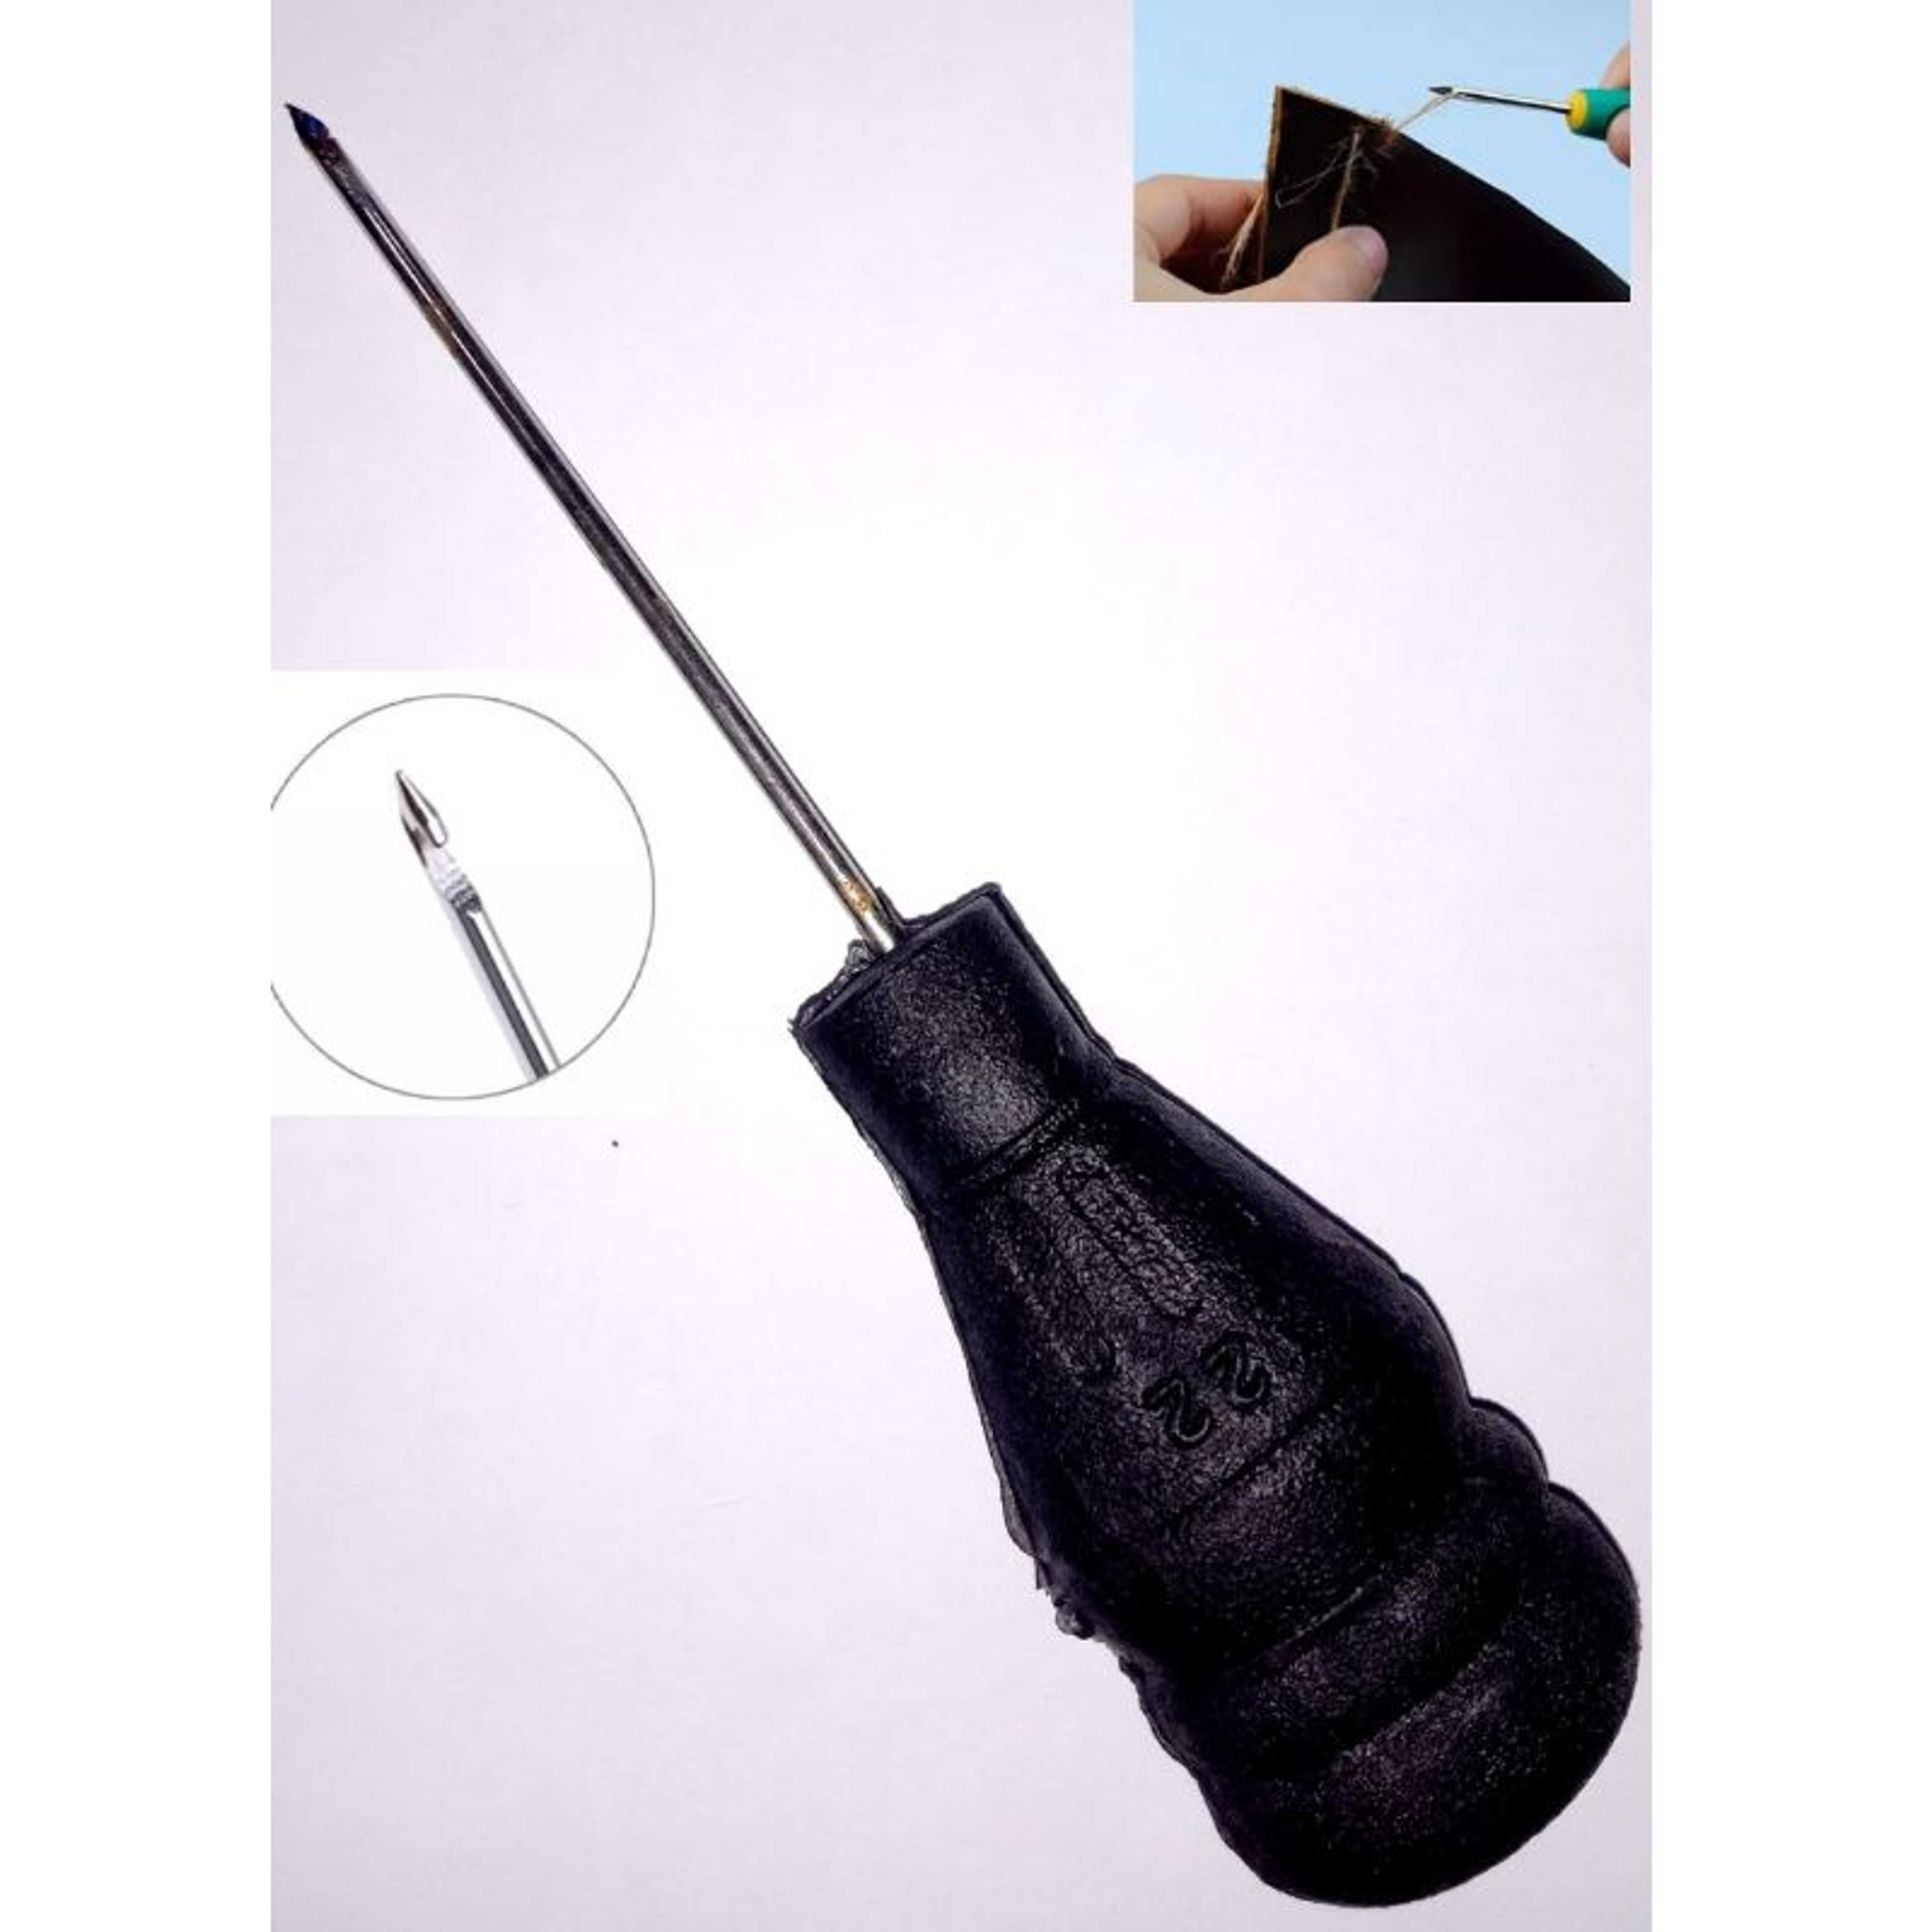 Sewing Crochet Plastics Steel Sticher Sewing Awl For Shoes Repair-KS